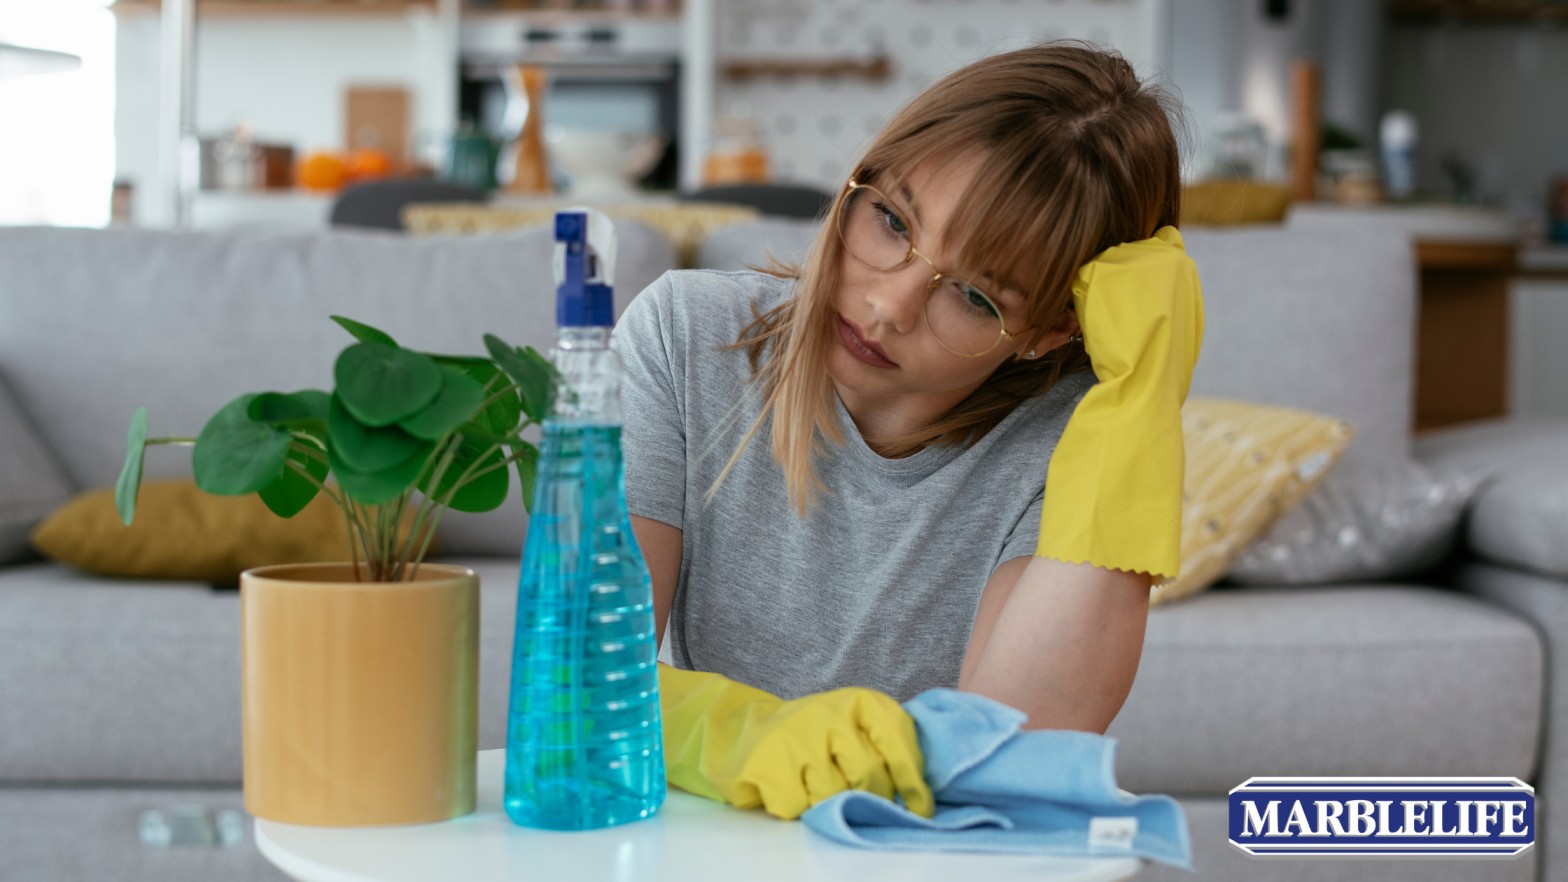 DIY Cleaning Blunders: Are Your Home Solutions Really Safe? - Post